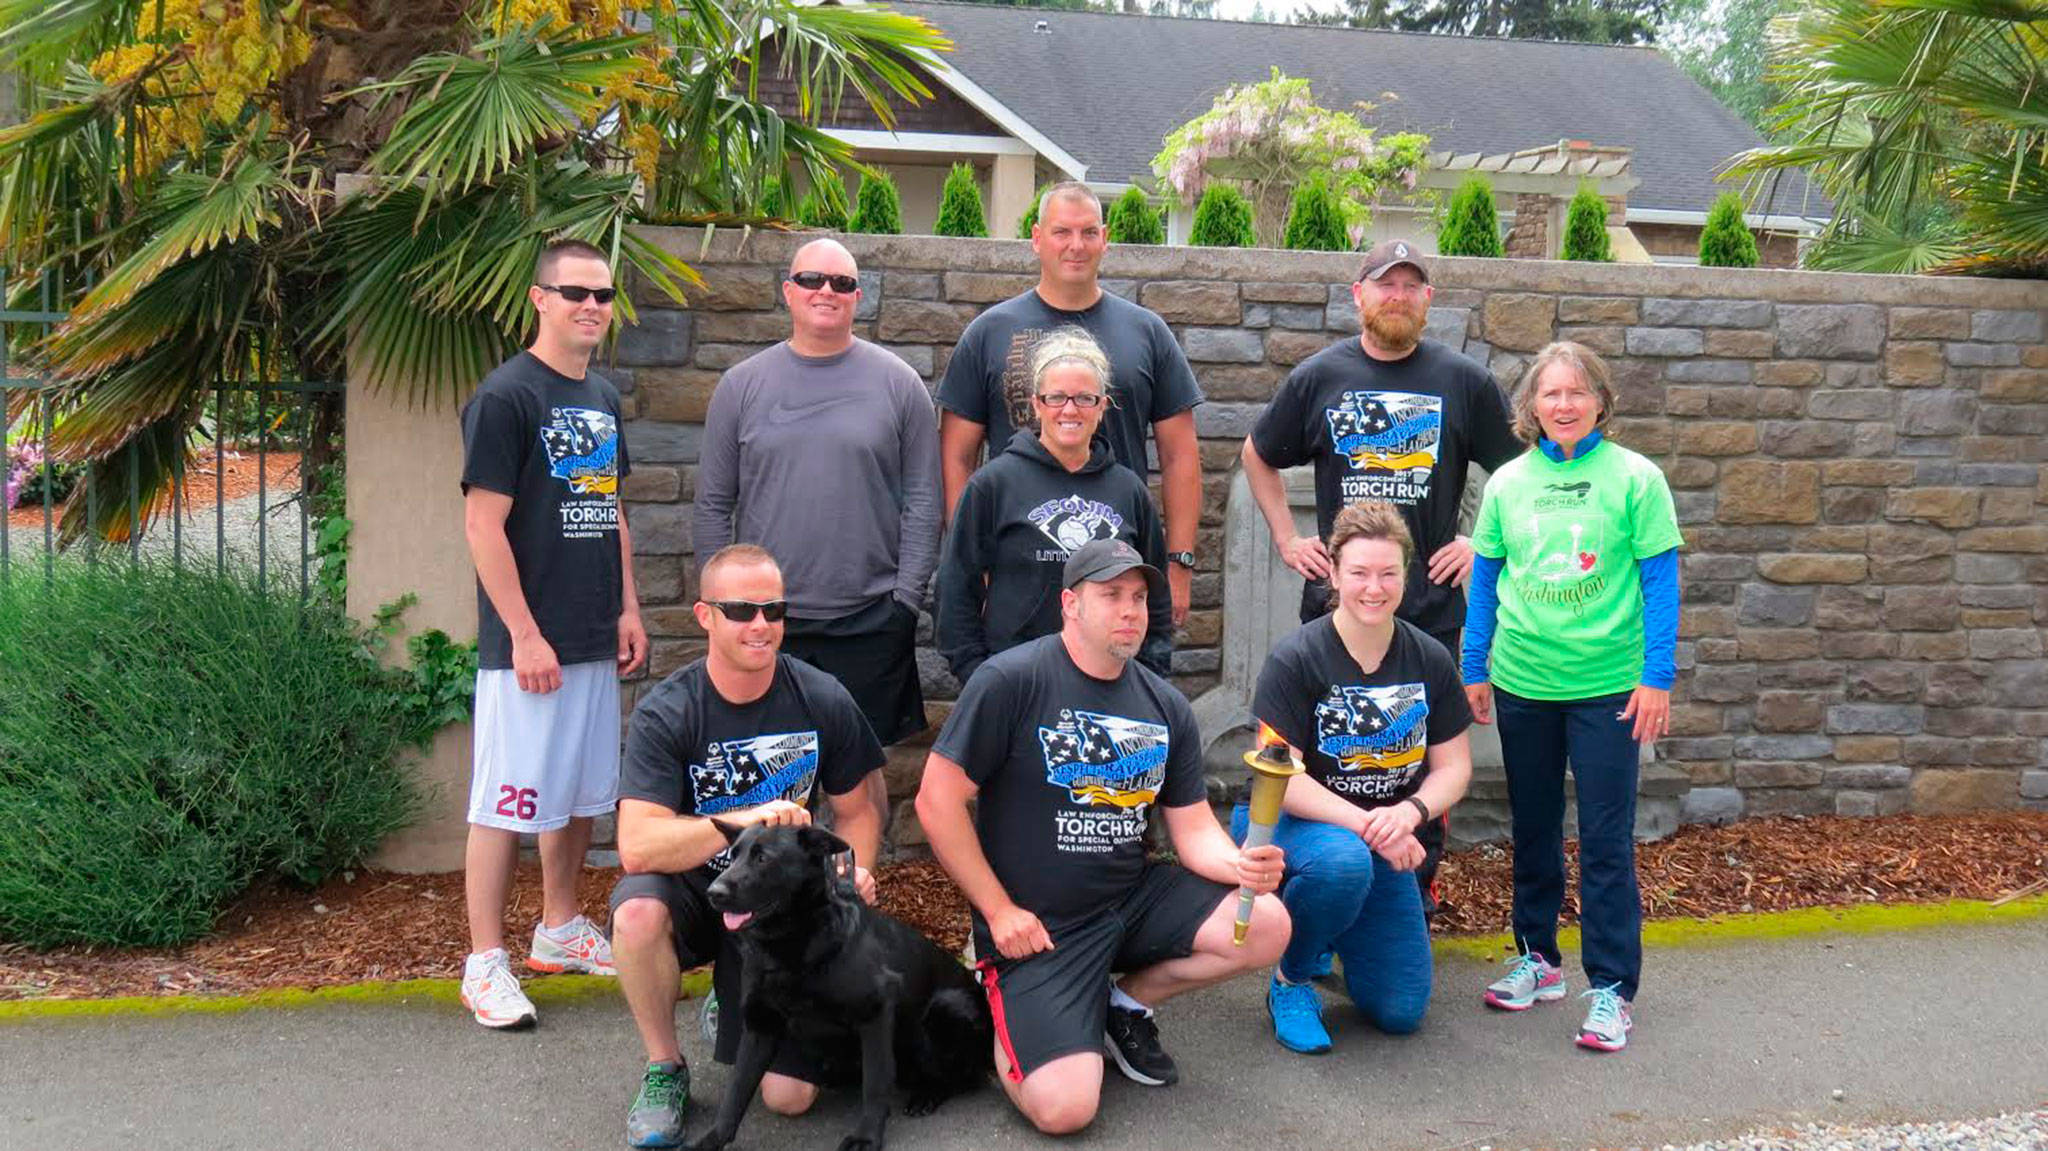 Back row left, Sequim Police Department Officer Kyle Resser, Clallam County Sheriff’s Office Deputy Don Kitchen, CCSO Deputy Michael Leiter, SPD Sgt. Mike Hill, Police Chief Sheri Crain, and middle, SPD Officer Kindryn Leiter. Front row from left, SPD Officer Tony Bush with K-9 Mamba, SPD Records Specialist Josh Rees and SPD Officer Stephenie Benes. Photo courtesy Clallam County Sheriff’s Office